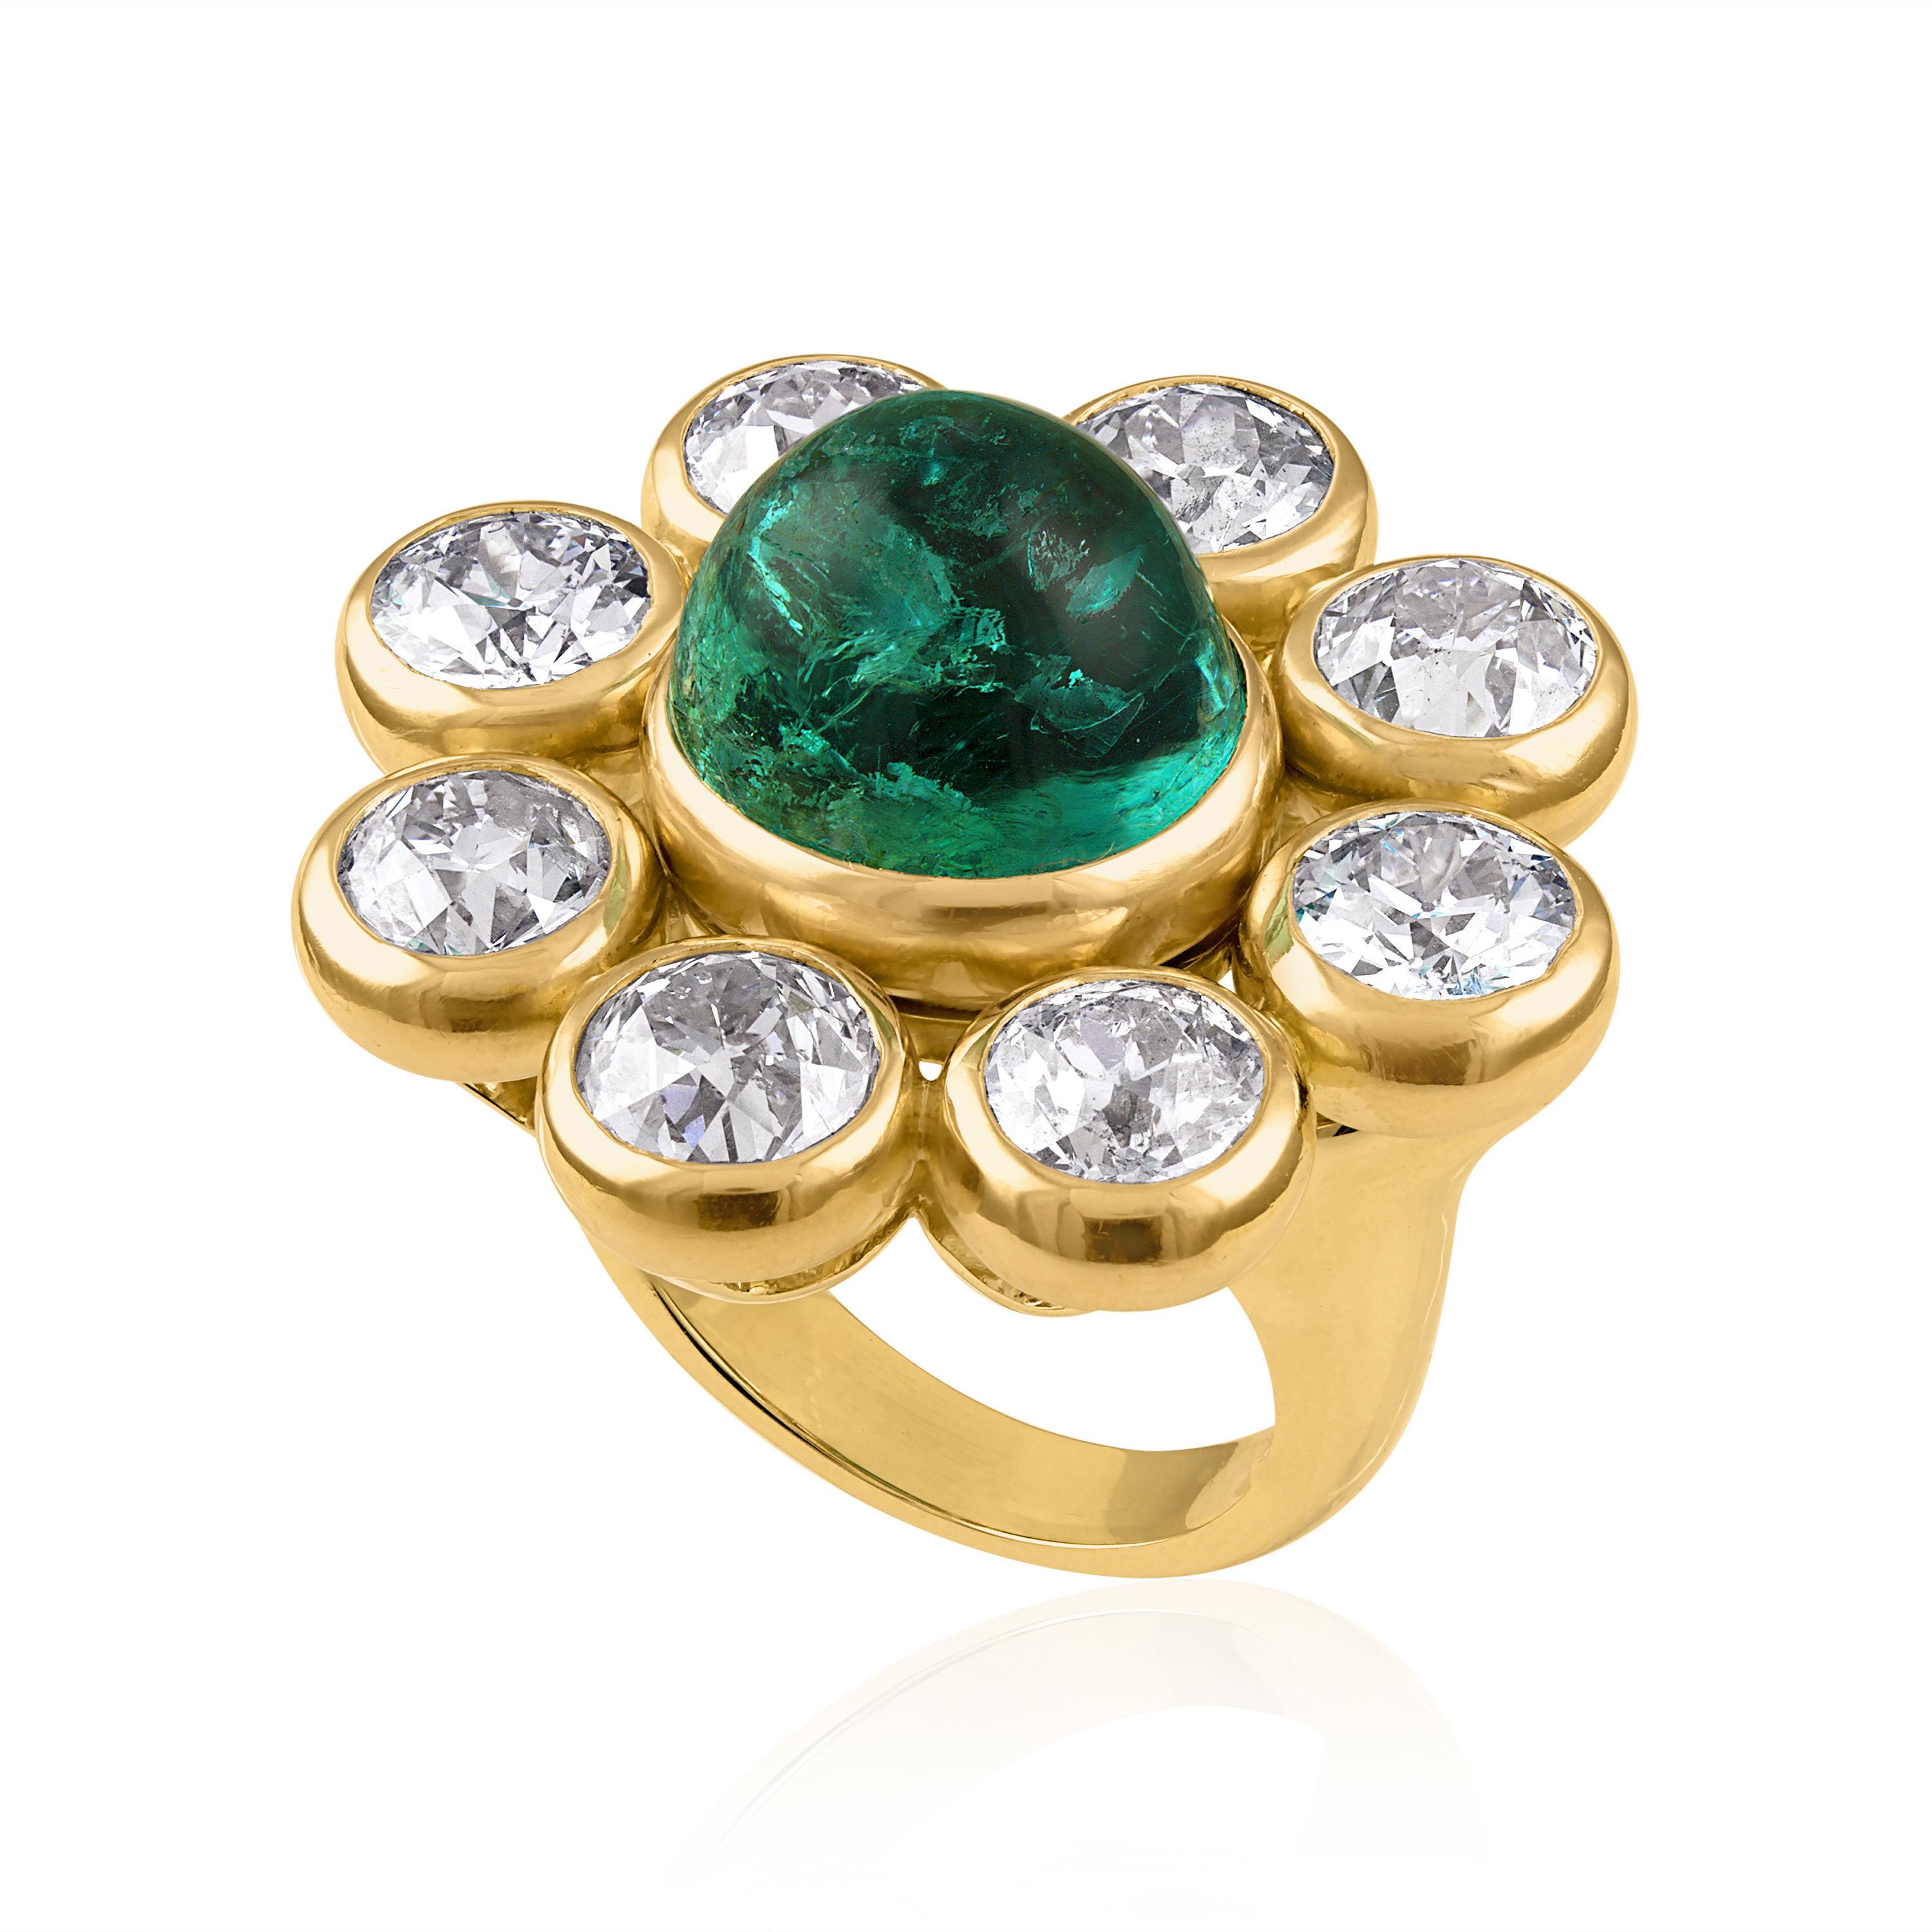 From Circa 1880’s-1890’s a magnificent brooch has been redesigned into a statement ring. The works of the famous maker G. Confalonieri and Updated for contemporary wear by Mindi Mond NY, two designers and eras come together for a showstopper result.